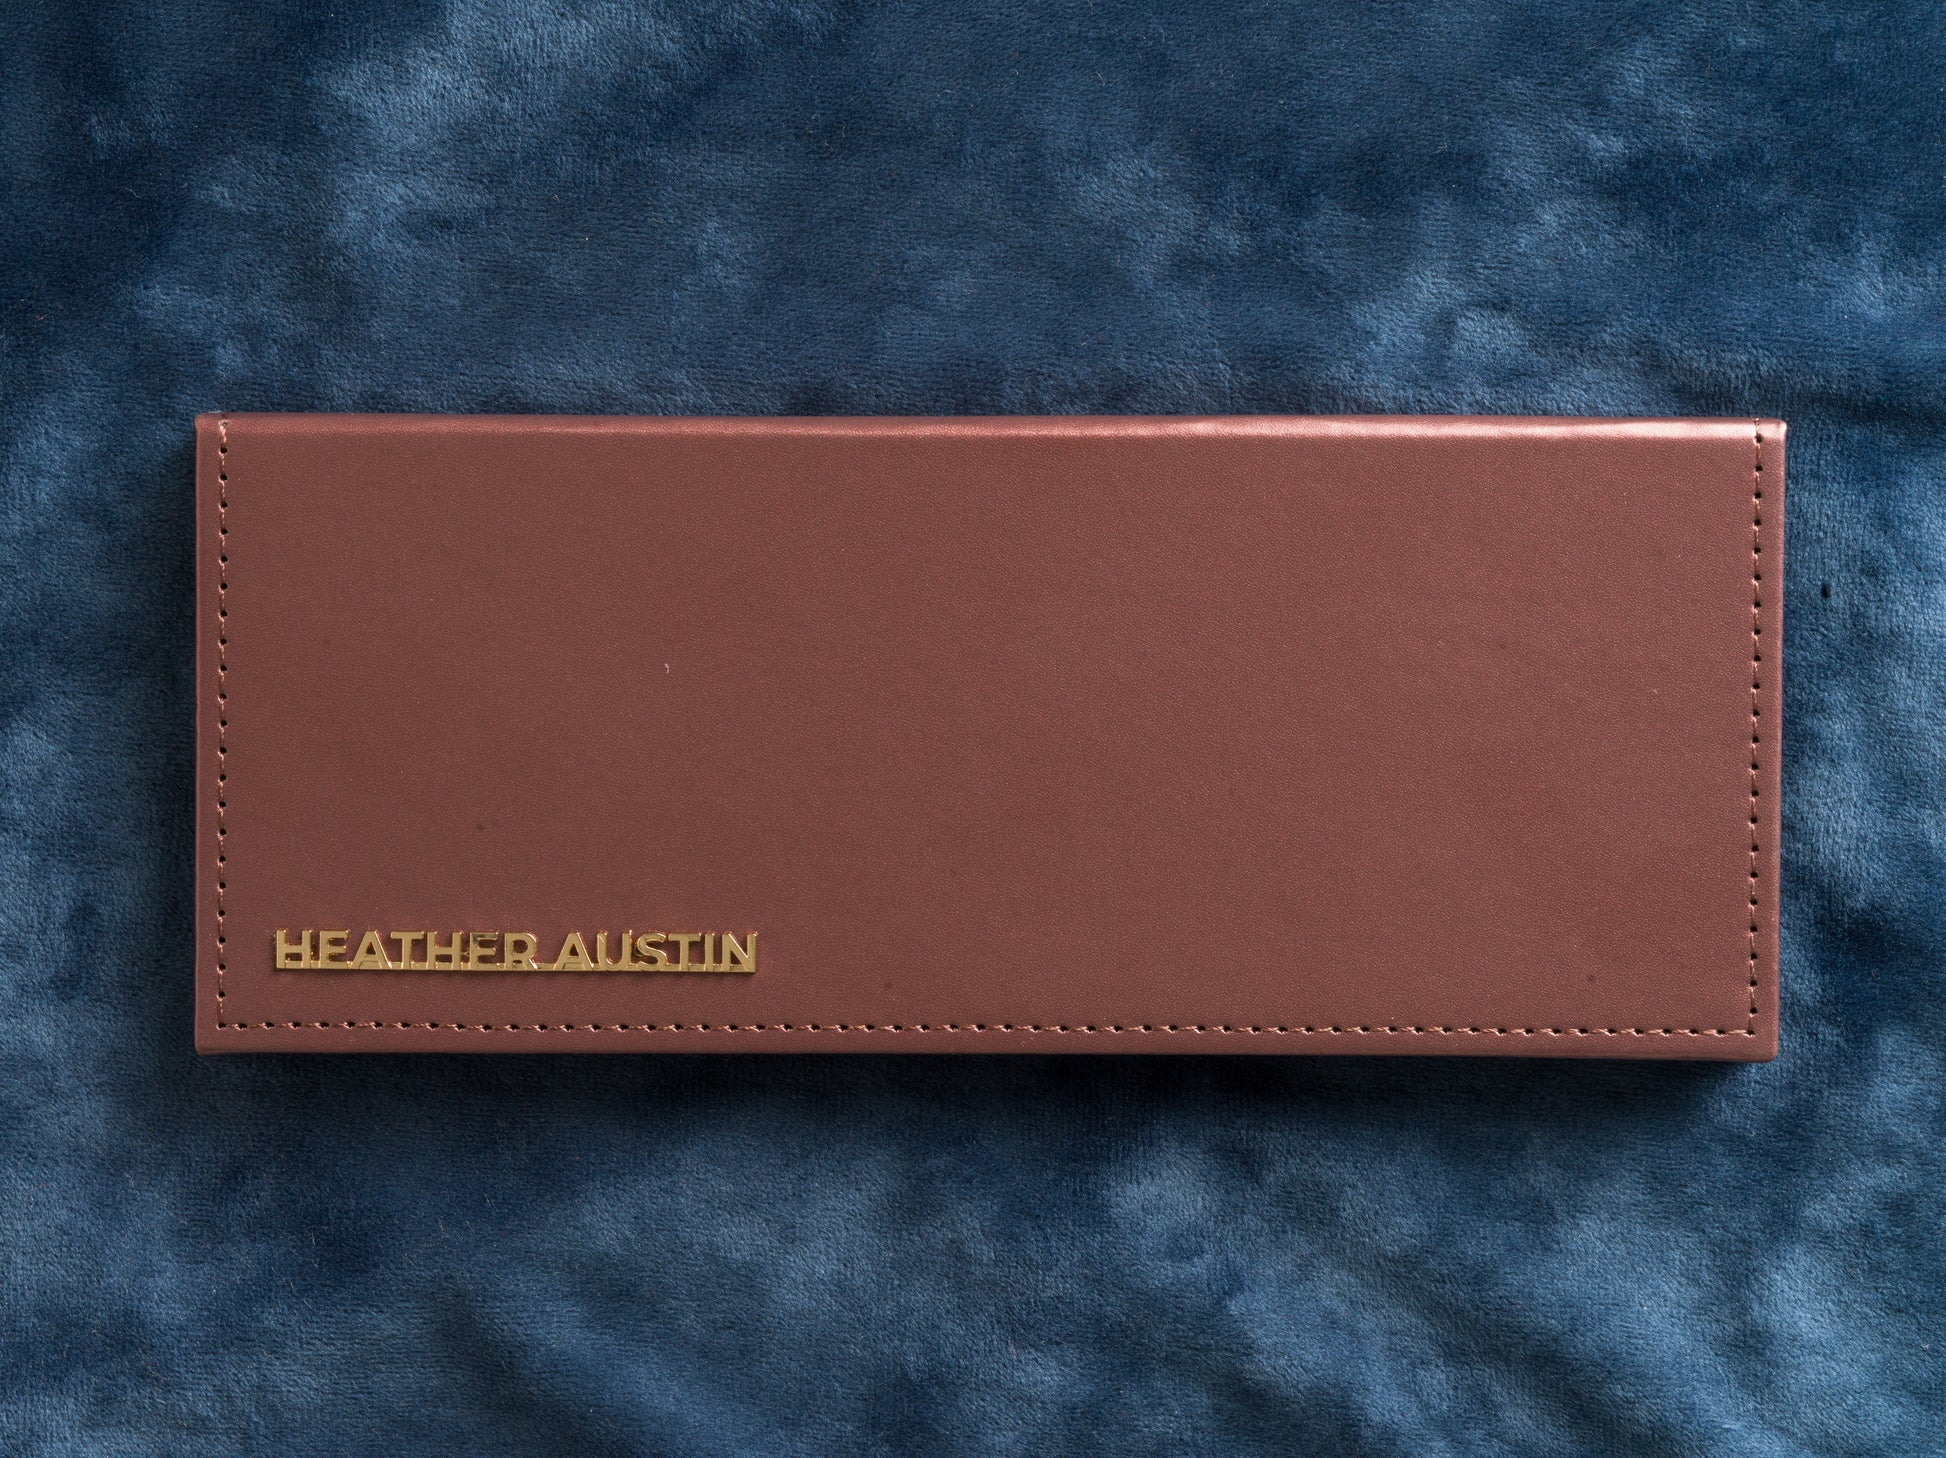 Heather Austin palette closed by Adept Cosmetics